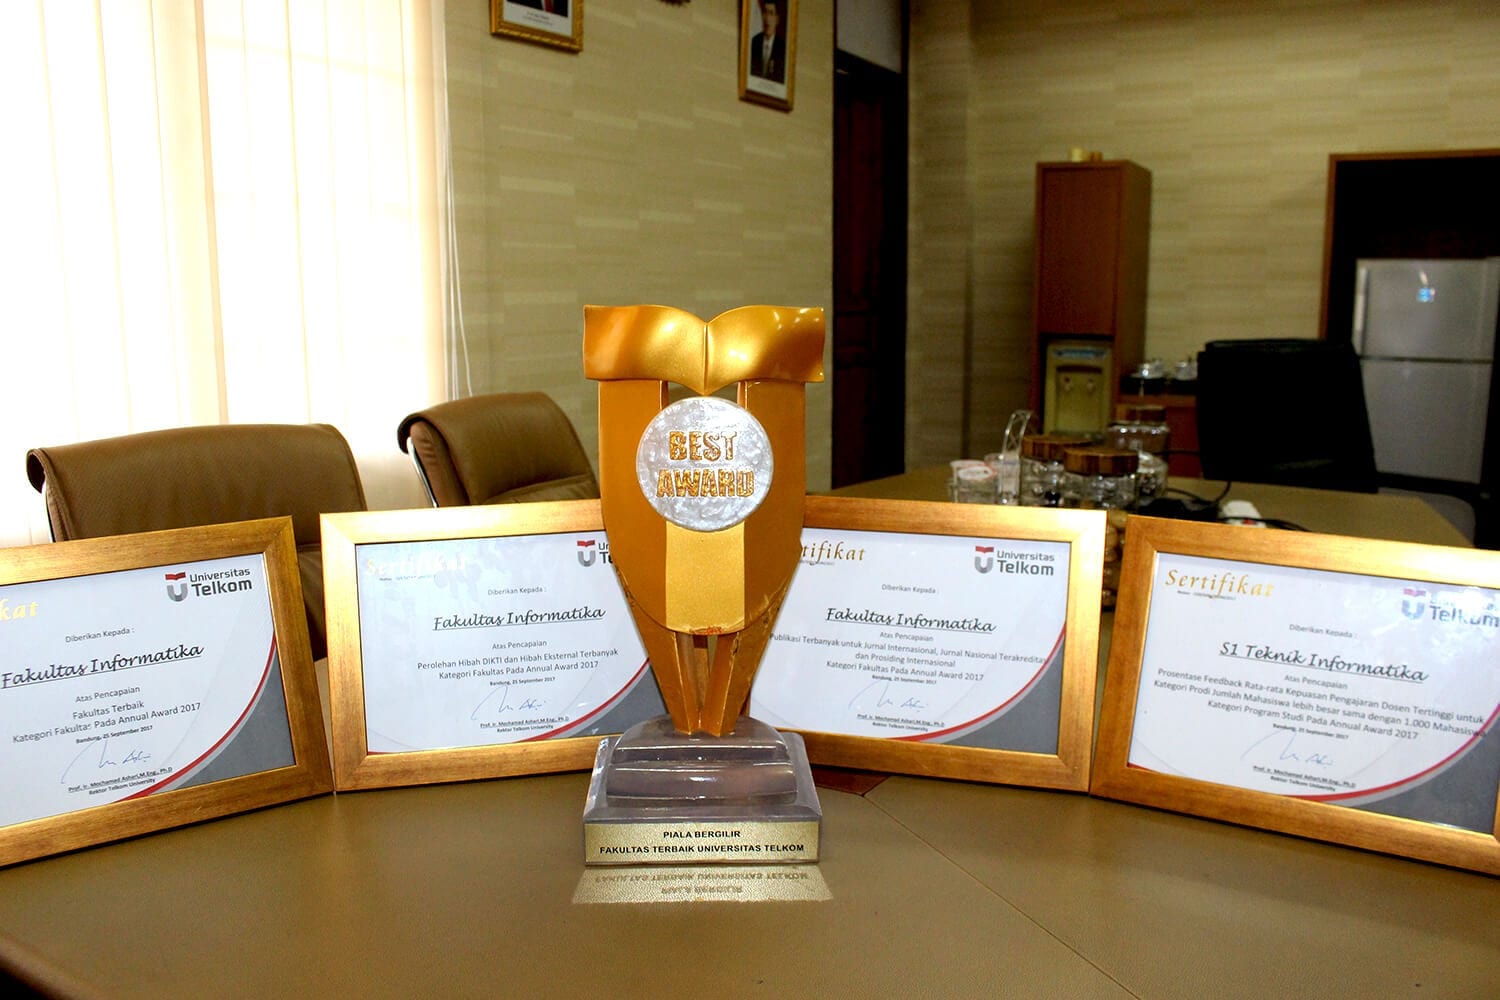 The School of Computing once again won many awards from Telkom University at the Bandung ICT Expo and Anja 2017